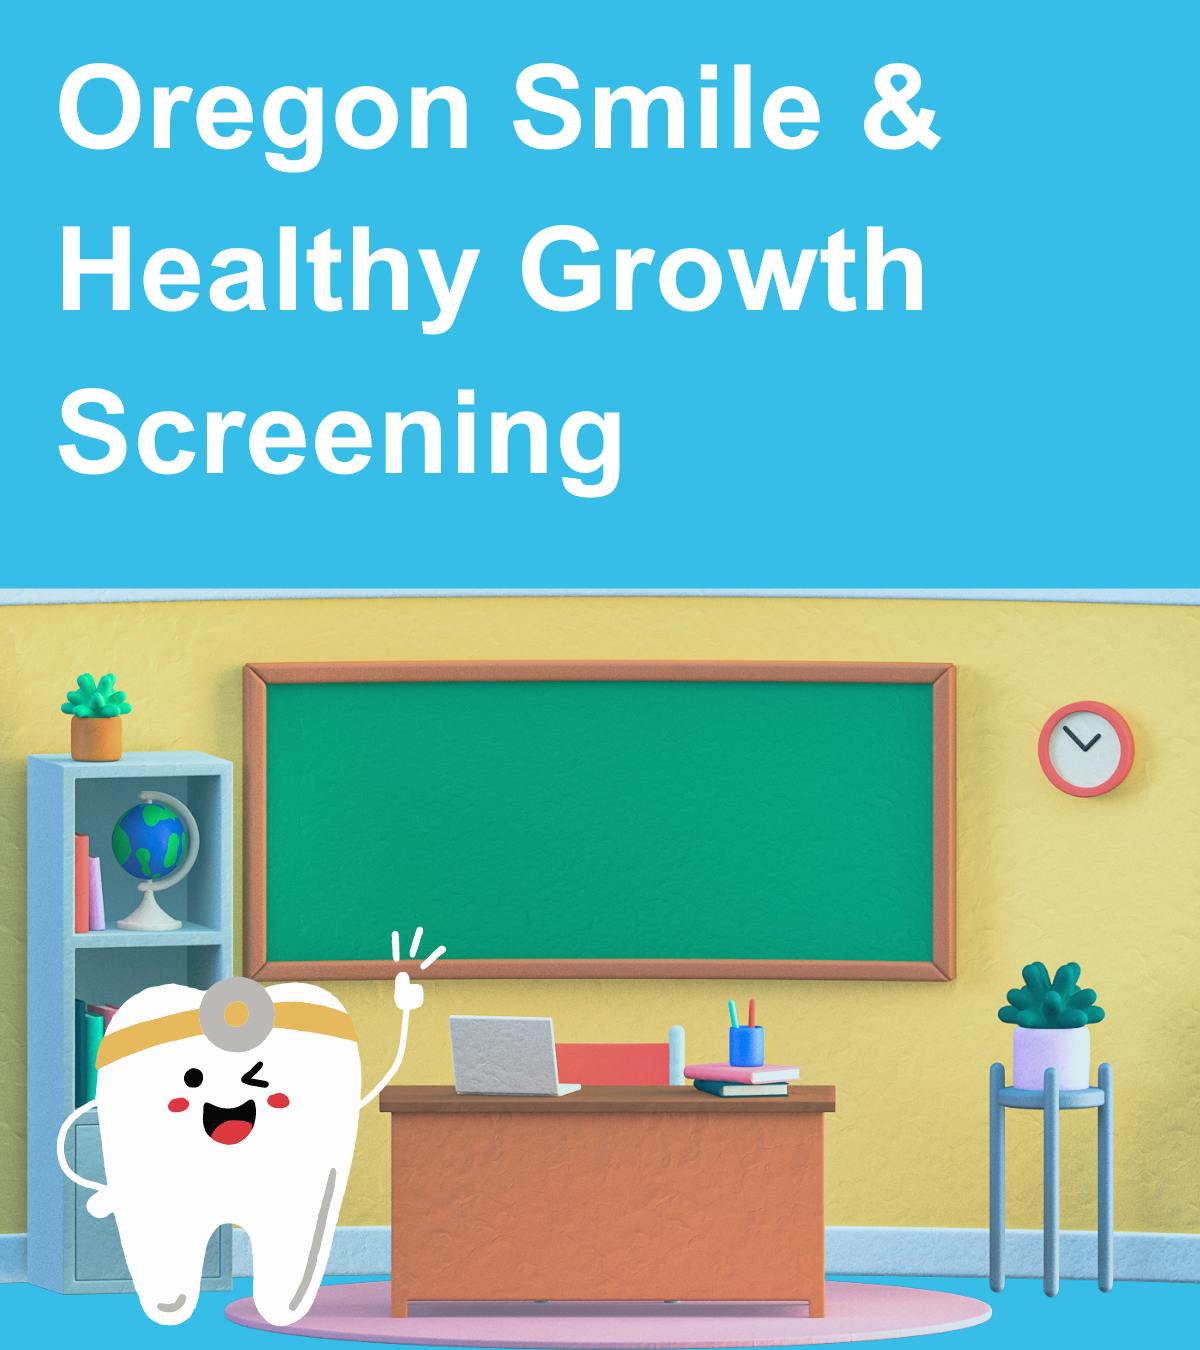 Blue background. Image of classroom with cartoon tooth dentist. Text: Oregon Smile & Healthy Growth Screening